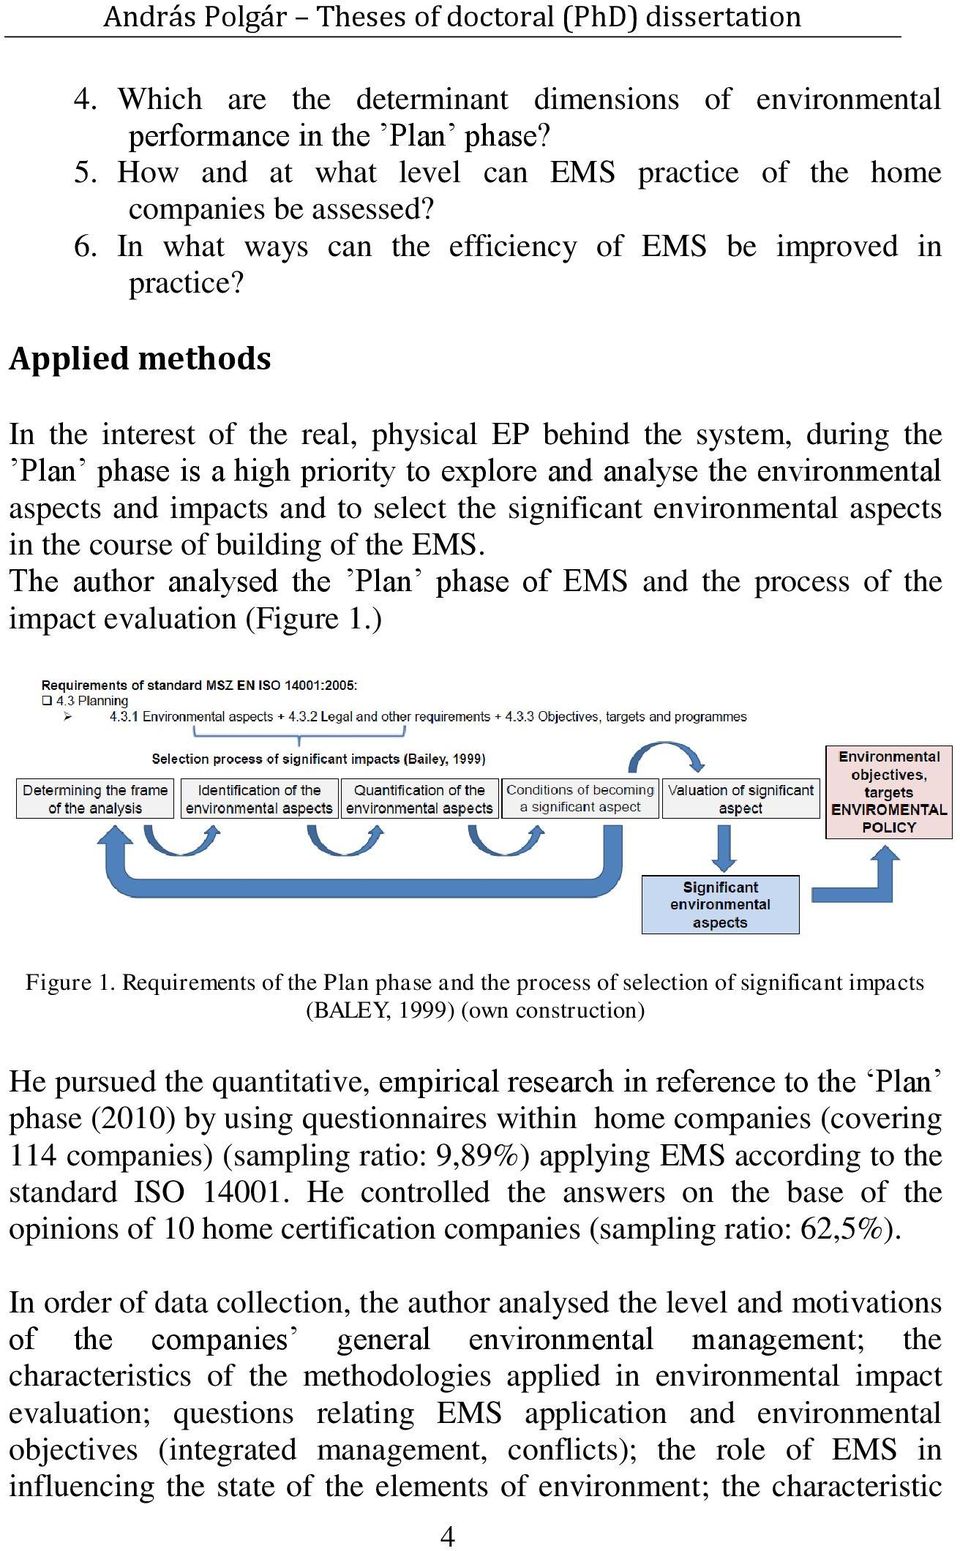 Applied methods In the interest of the real, physical EP behind the system, during the Plan phase is a high priority to explore and analyse the environmental aspects and impacts and to select the